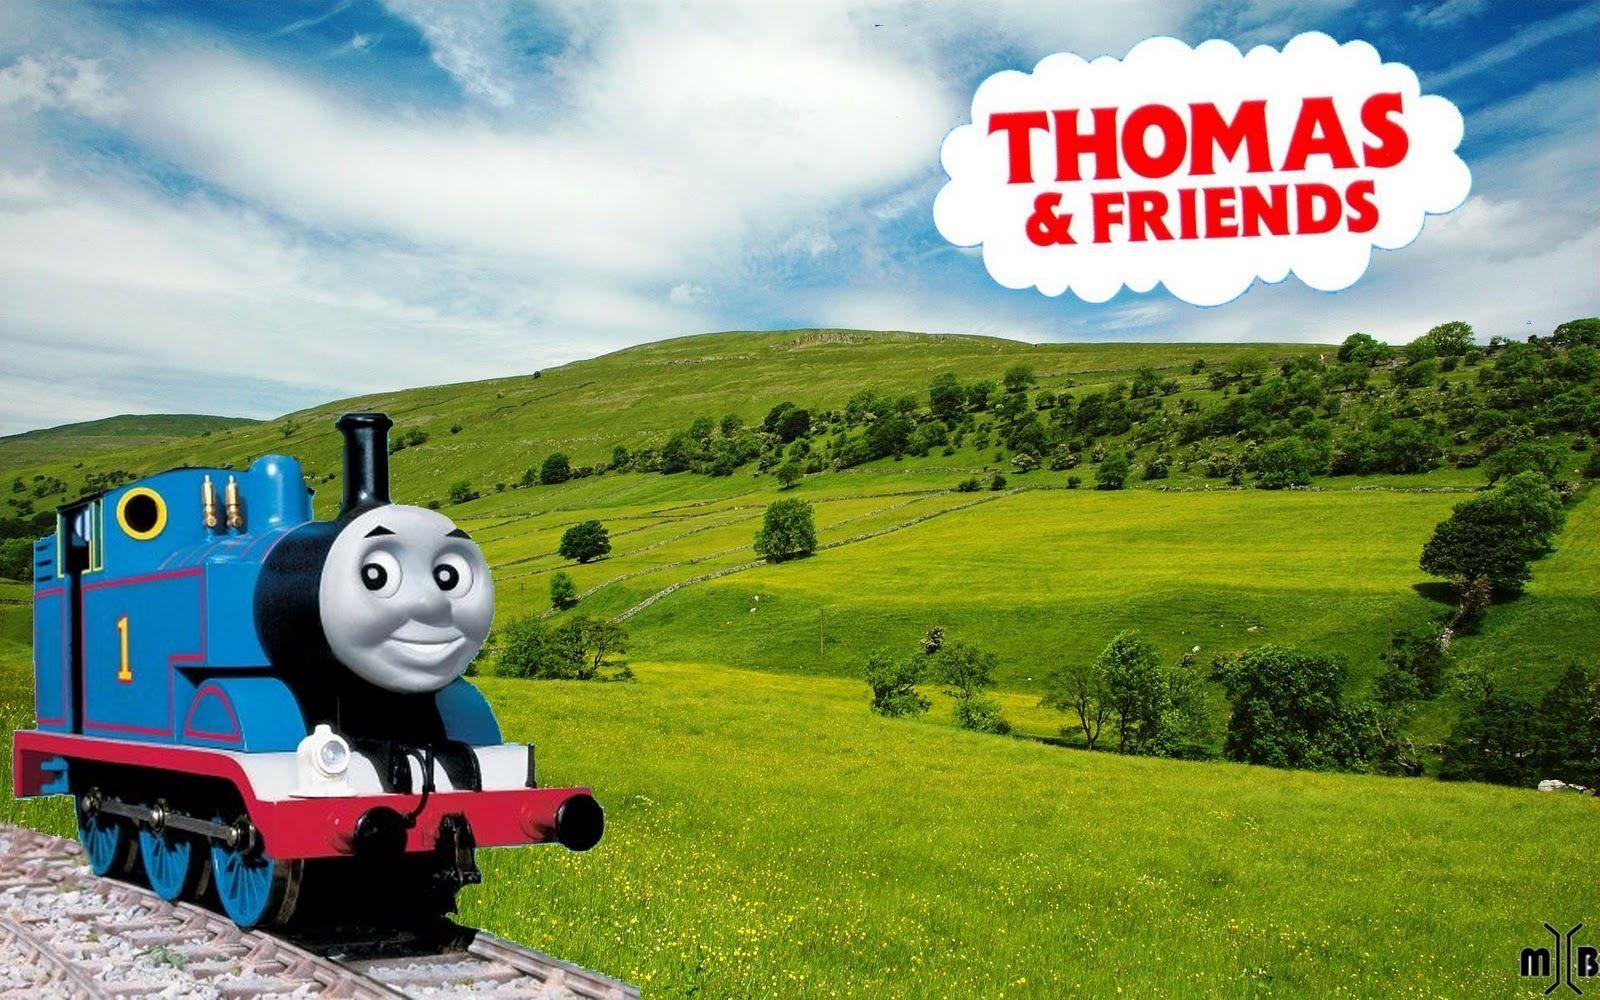 Thomas And Friends Wallpaper Thomas And Friends 21400813